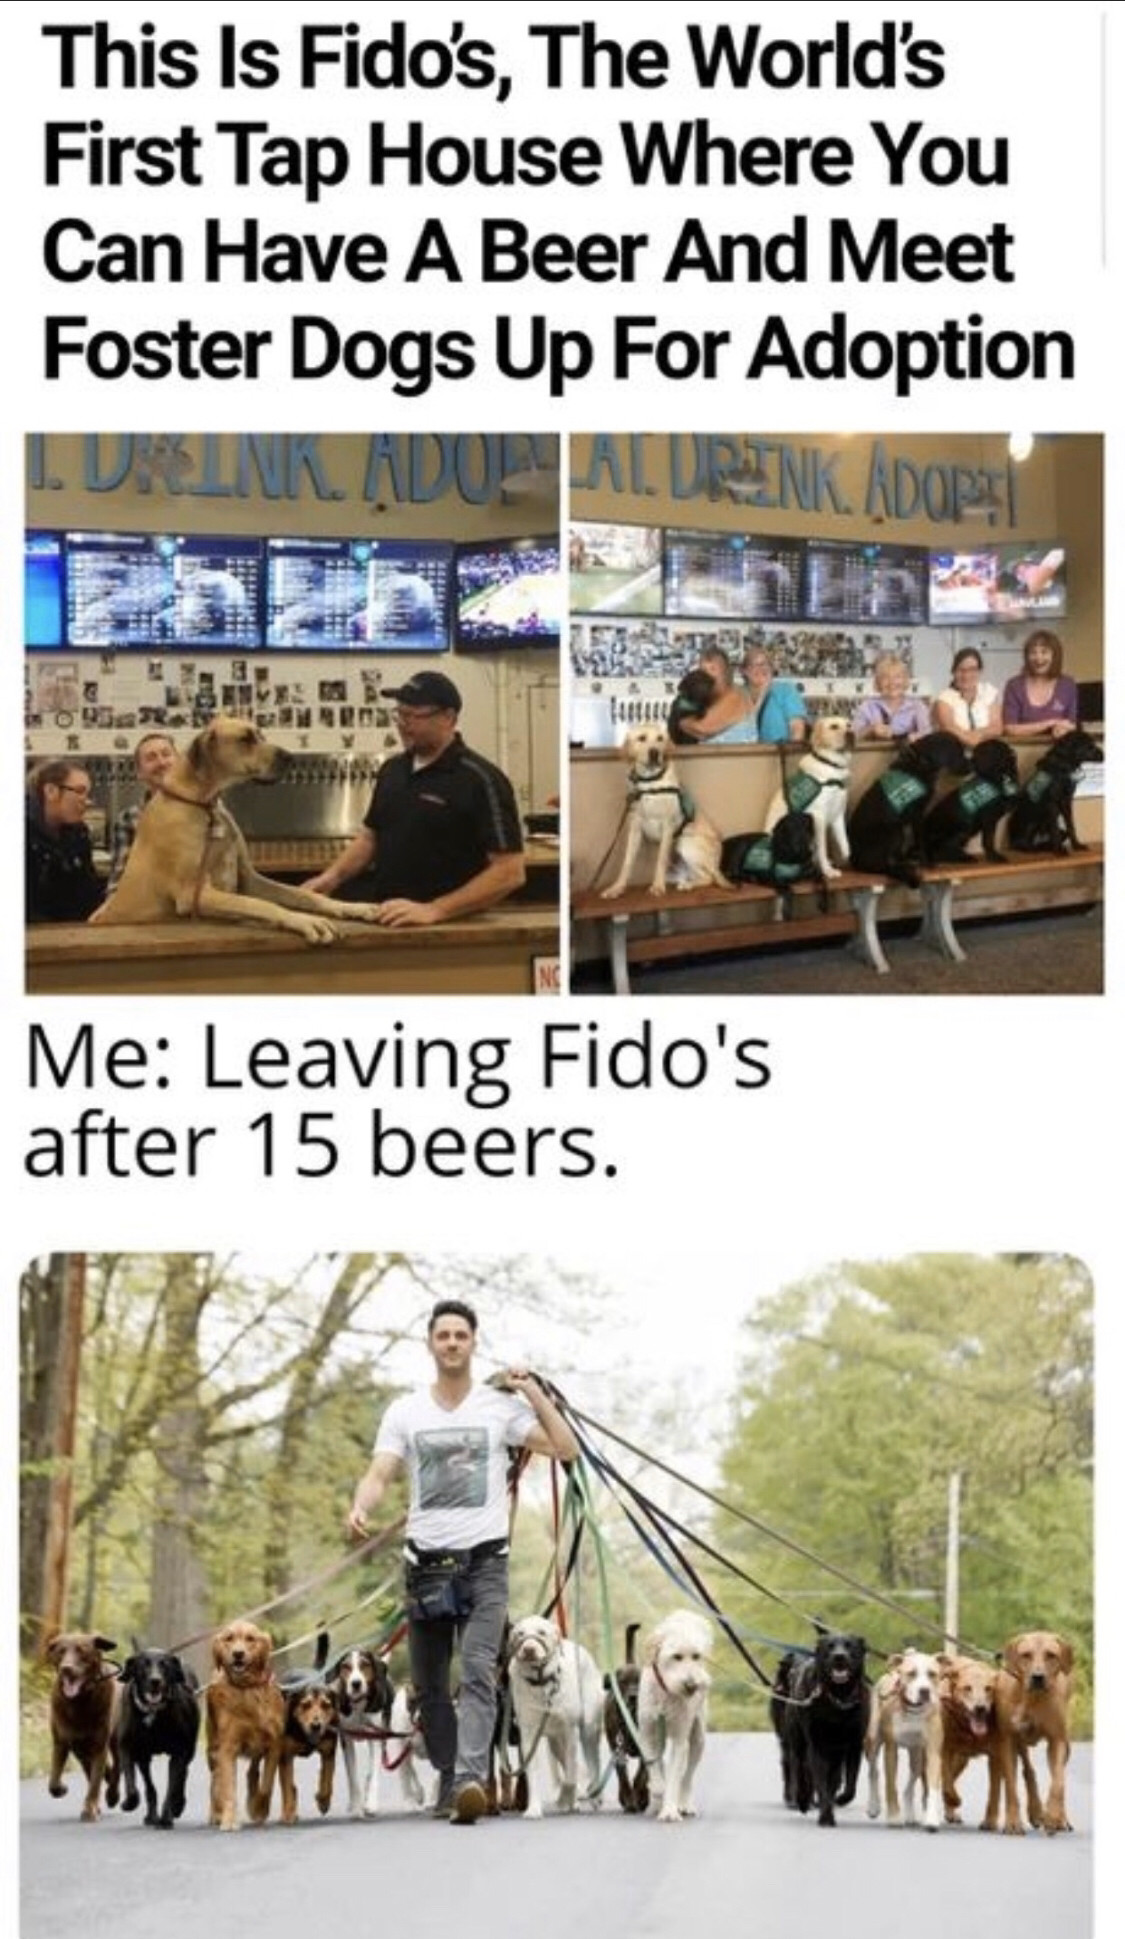 dog walker - This Is Fido's, The World's First Tap House Where You Can Have A Beer And Meet Foster Dogs Up For Adoption I. Dinladu Aldreinikado Me Leaving Fido's after 15 beers.